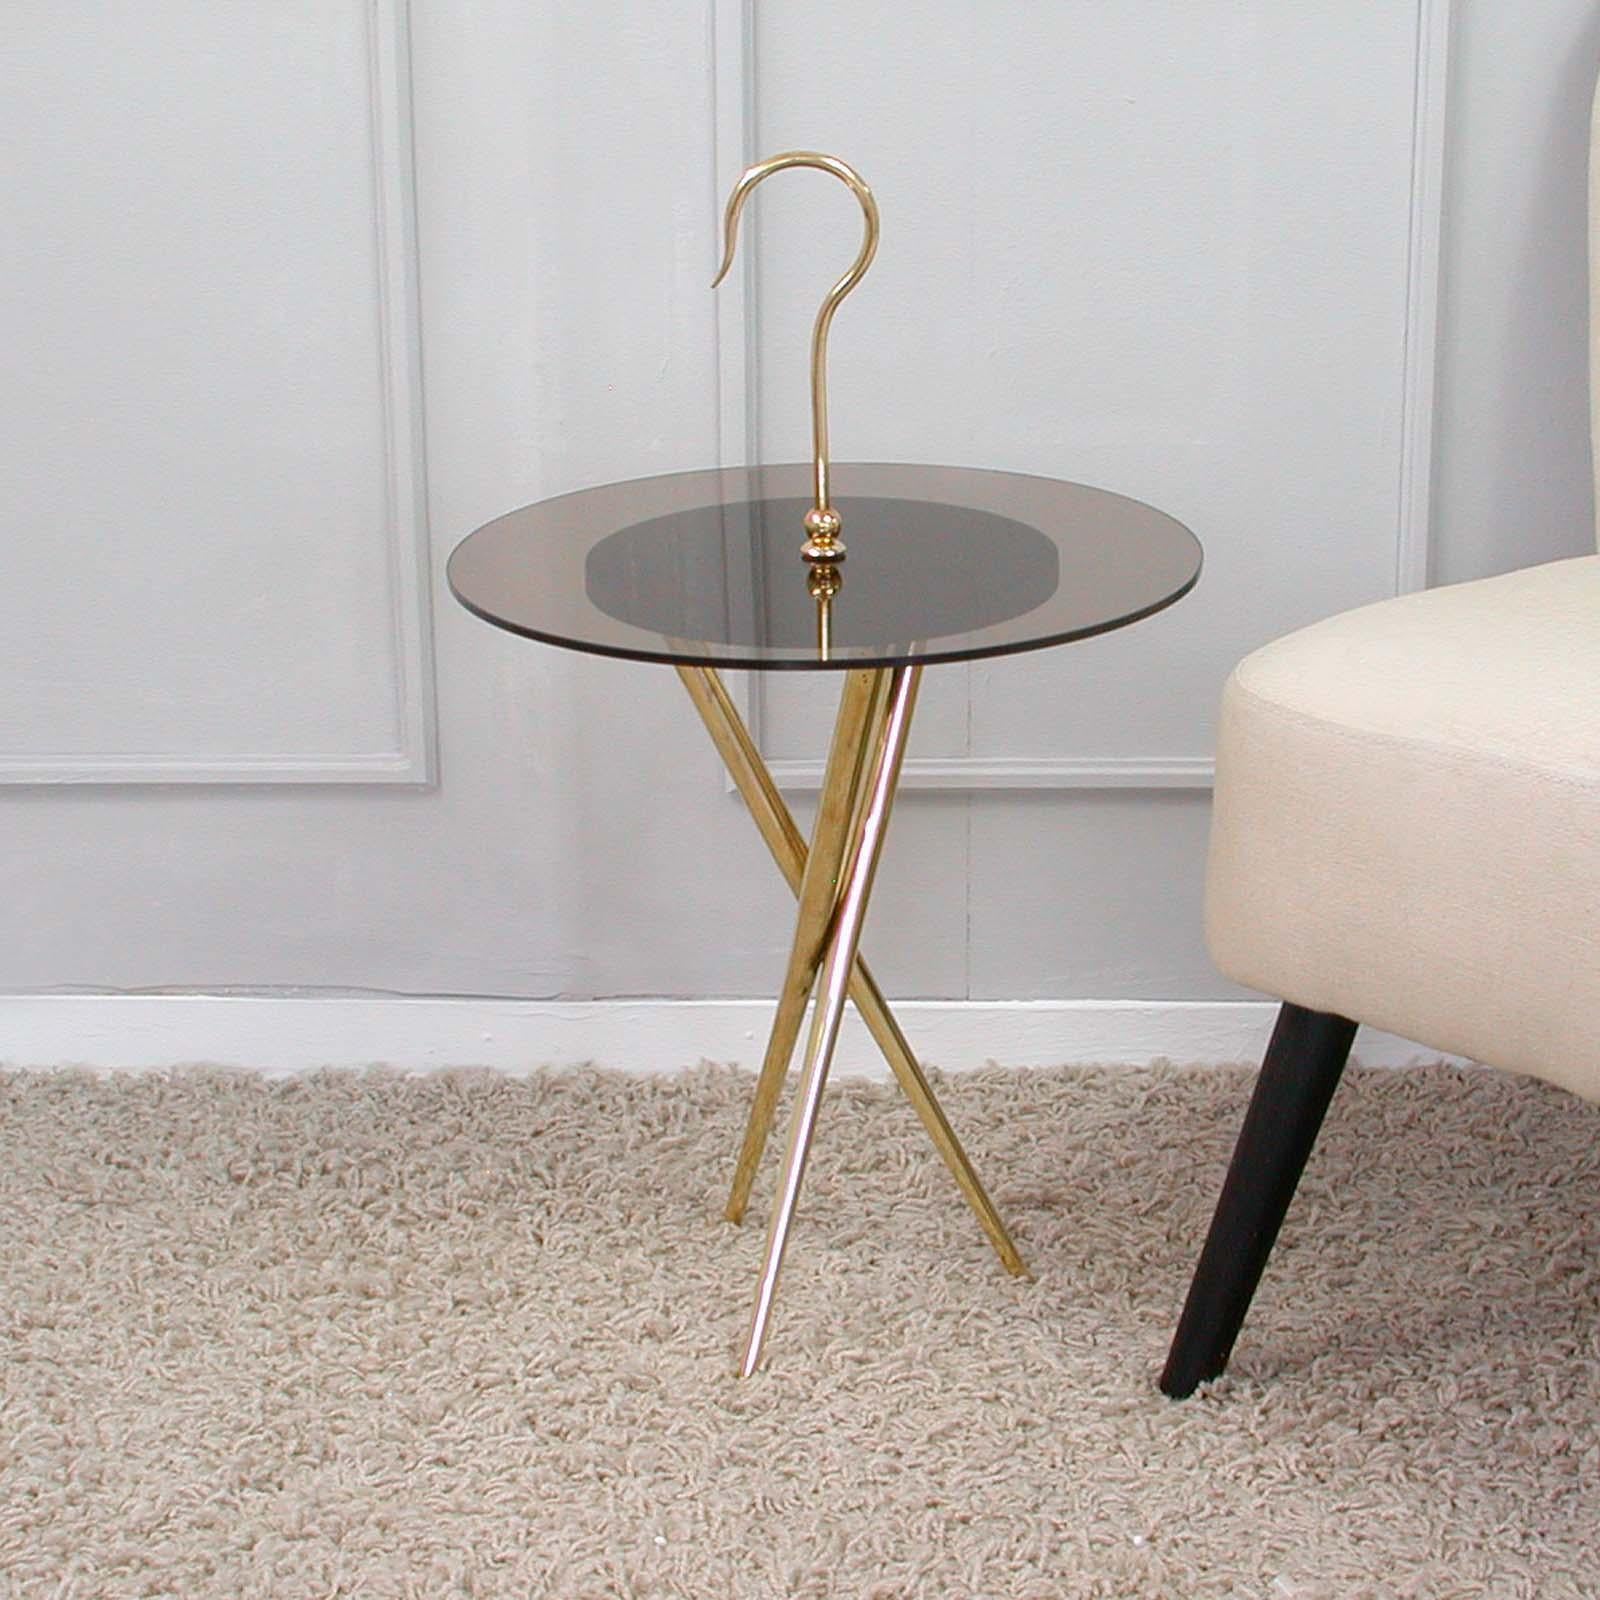 Italian Midcentury Brass and Tinted Glass Occasional Table, 1950s For Sale 5